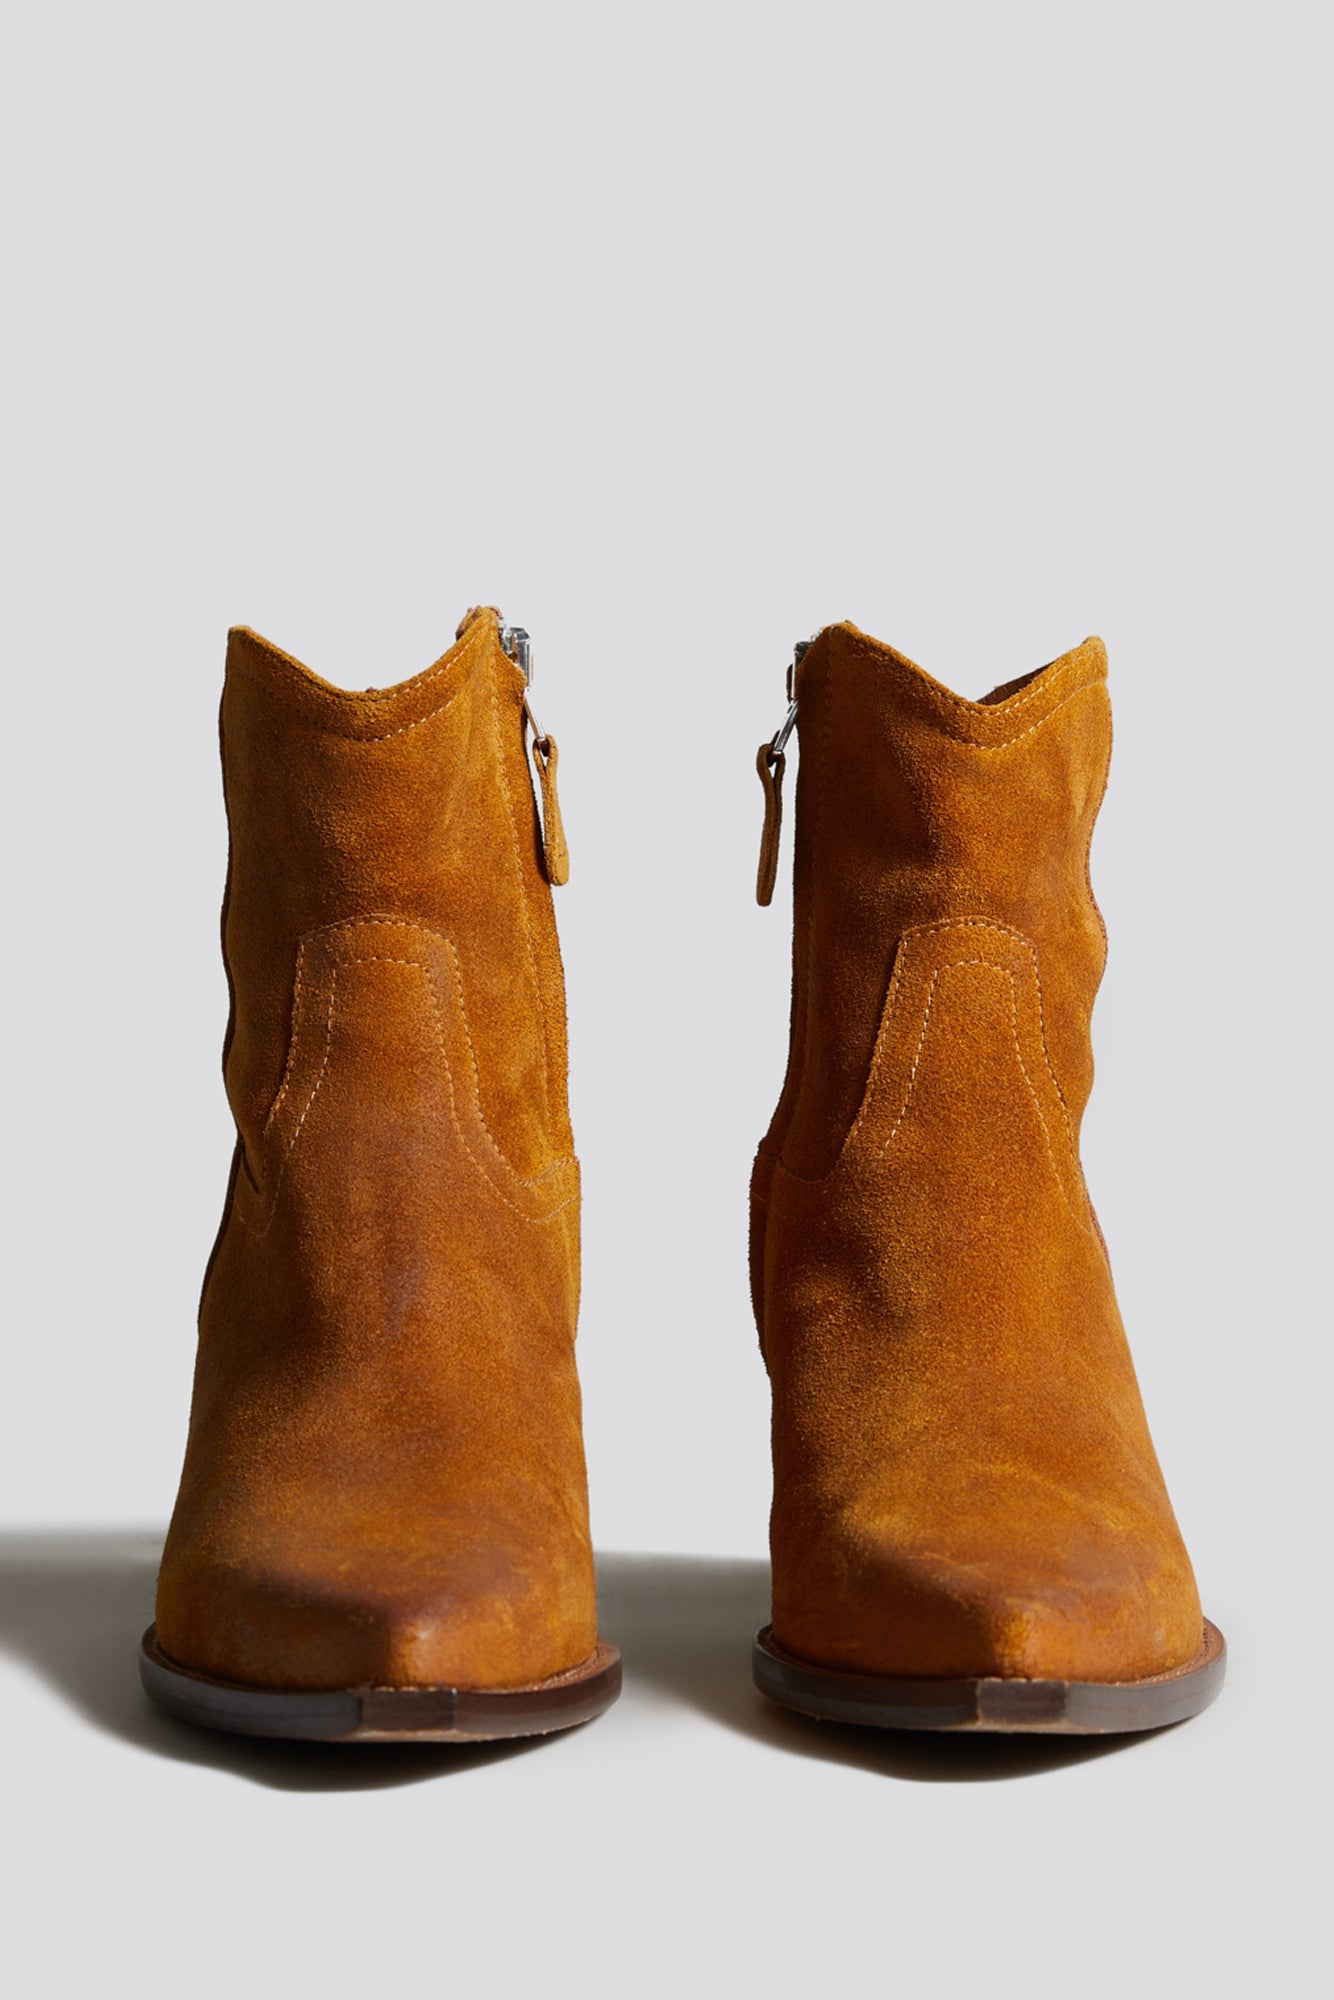 ANKLE COWBOY BOOT - LIGHT BROWN